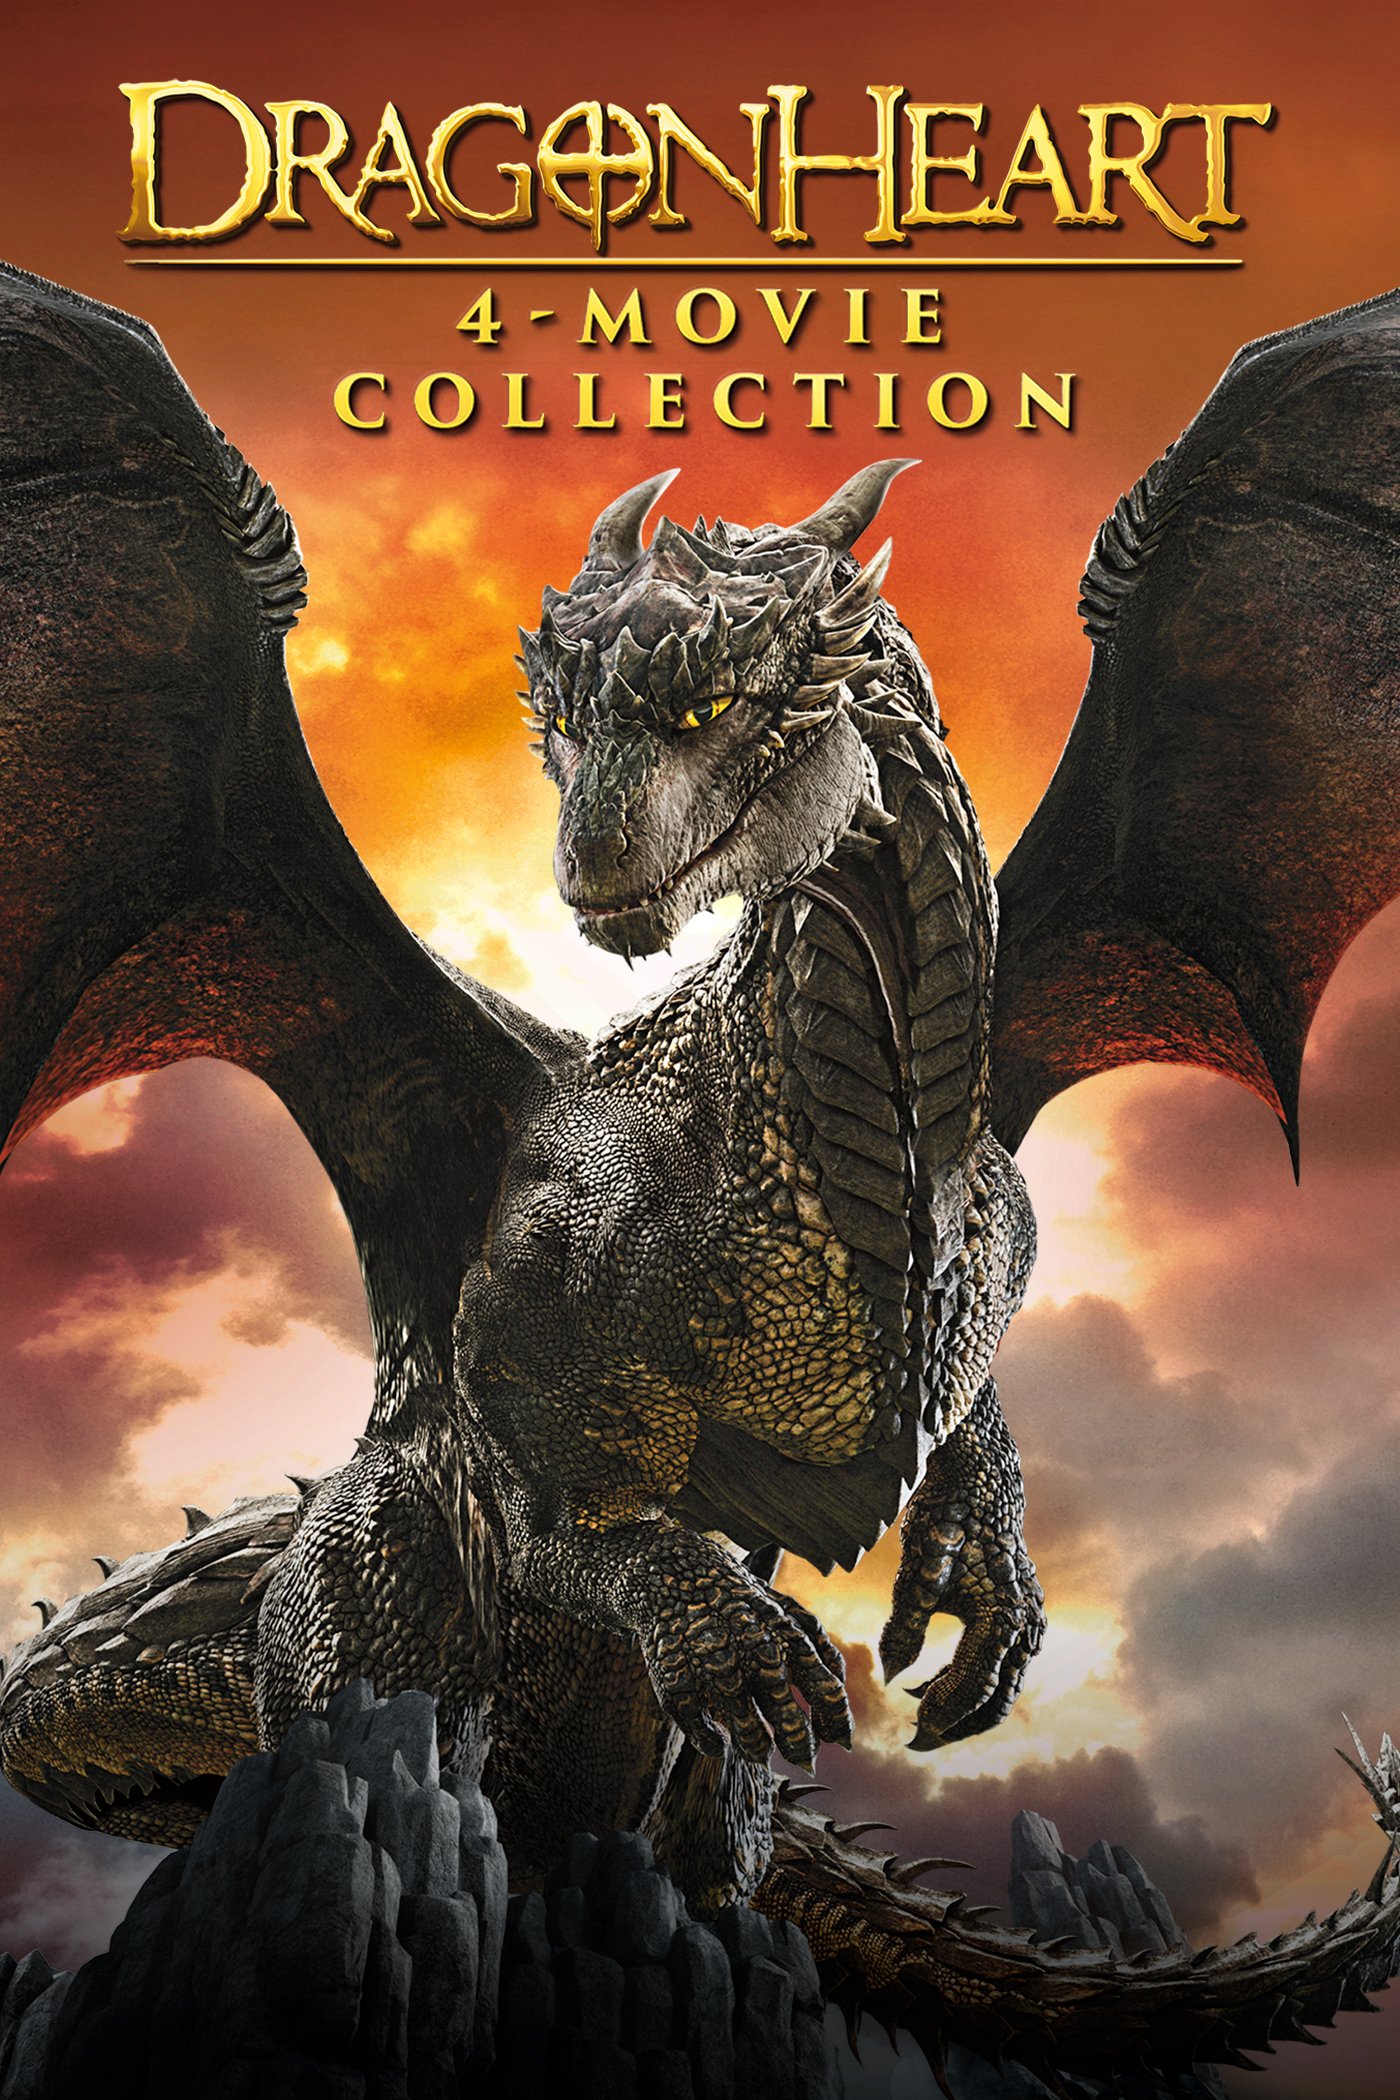 Download dragonheart image for free